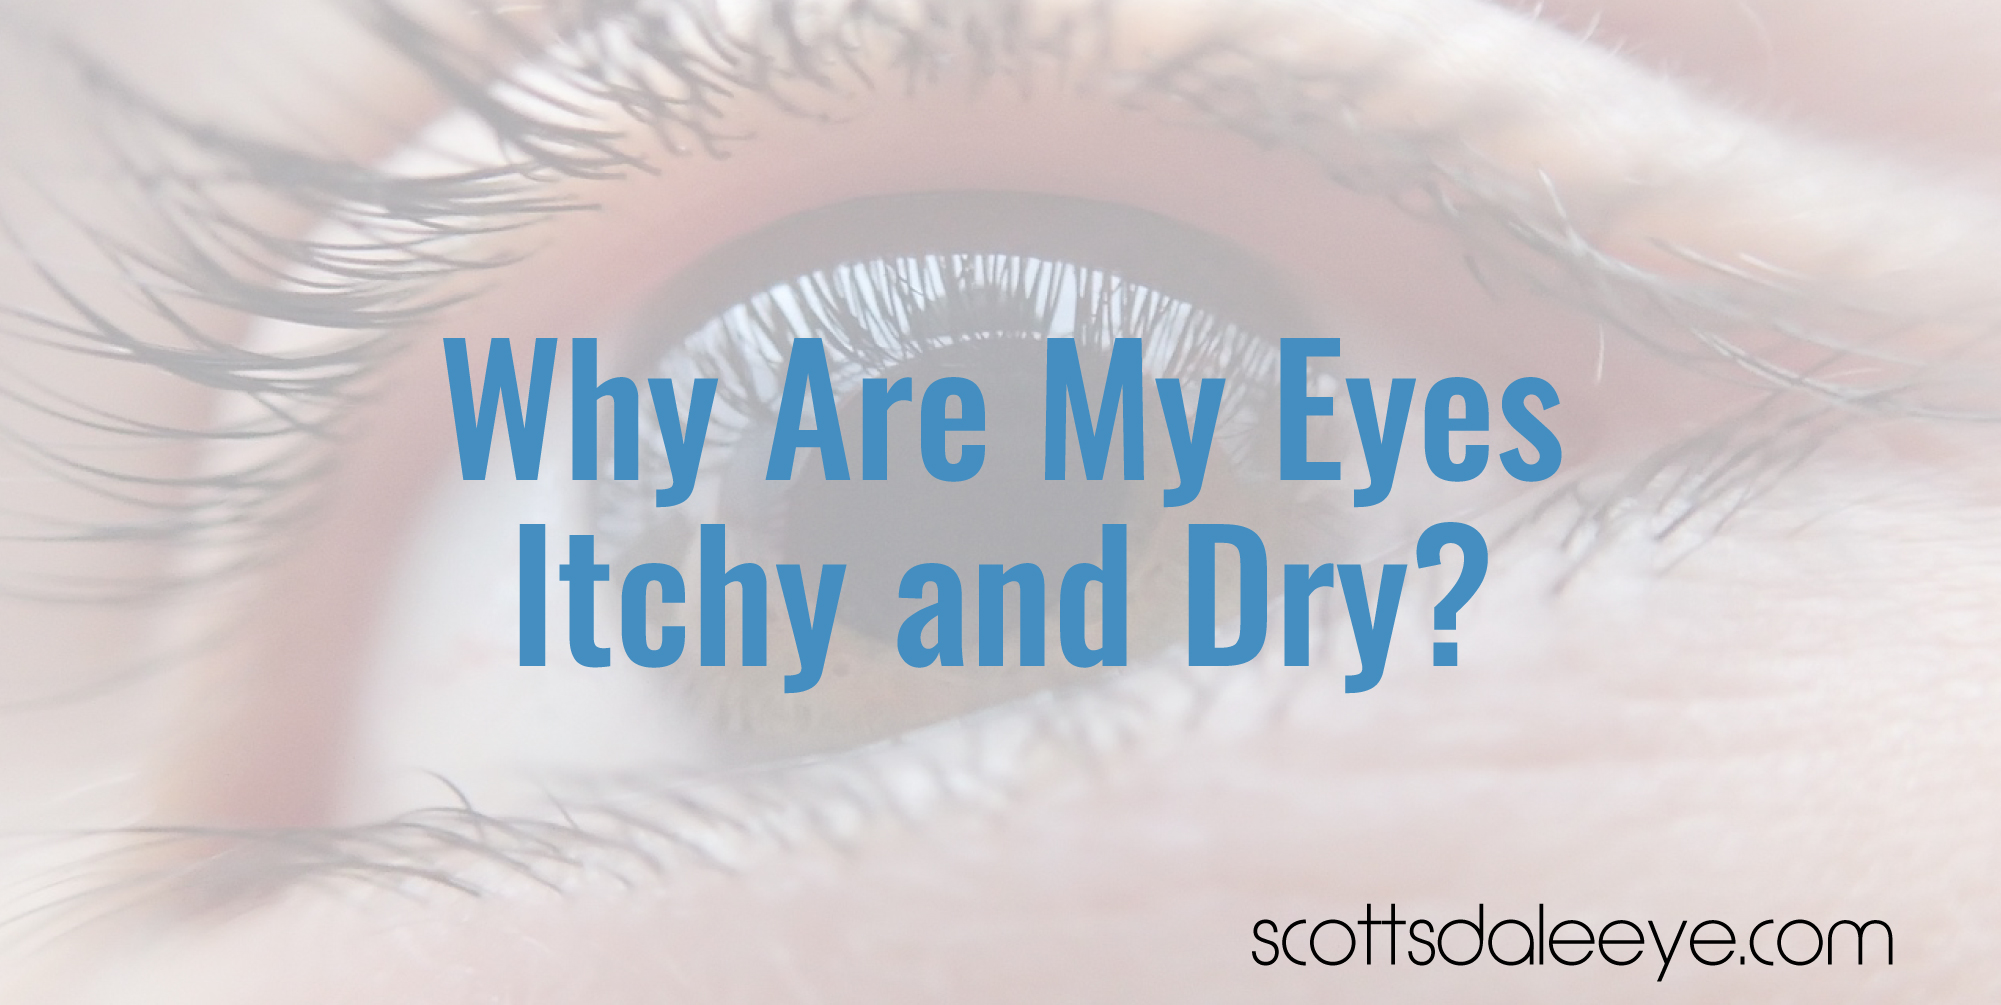 Why Are My Eyes Itchy and Dry?